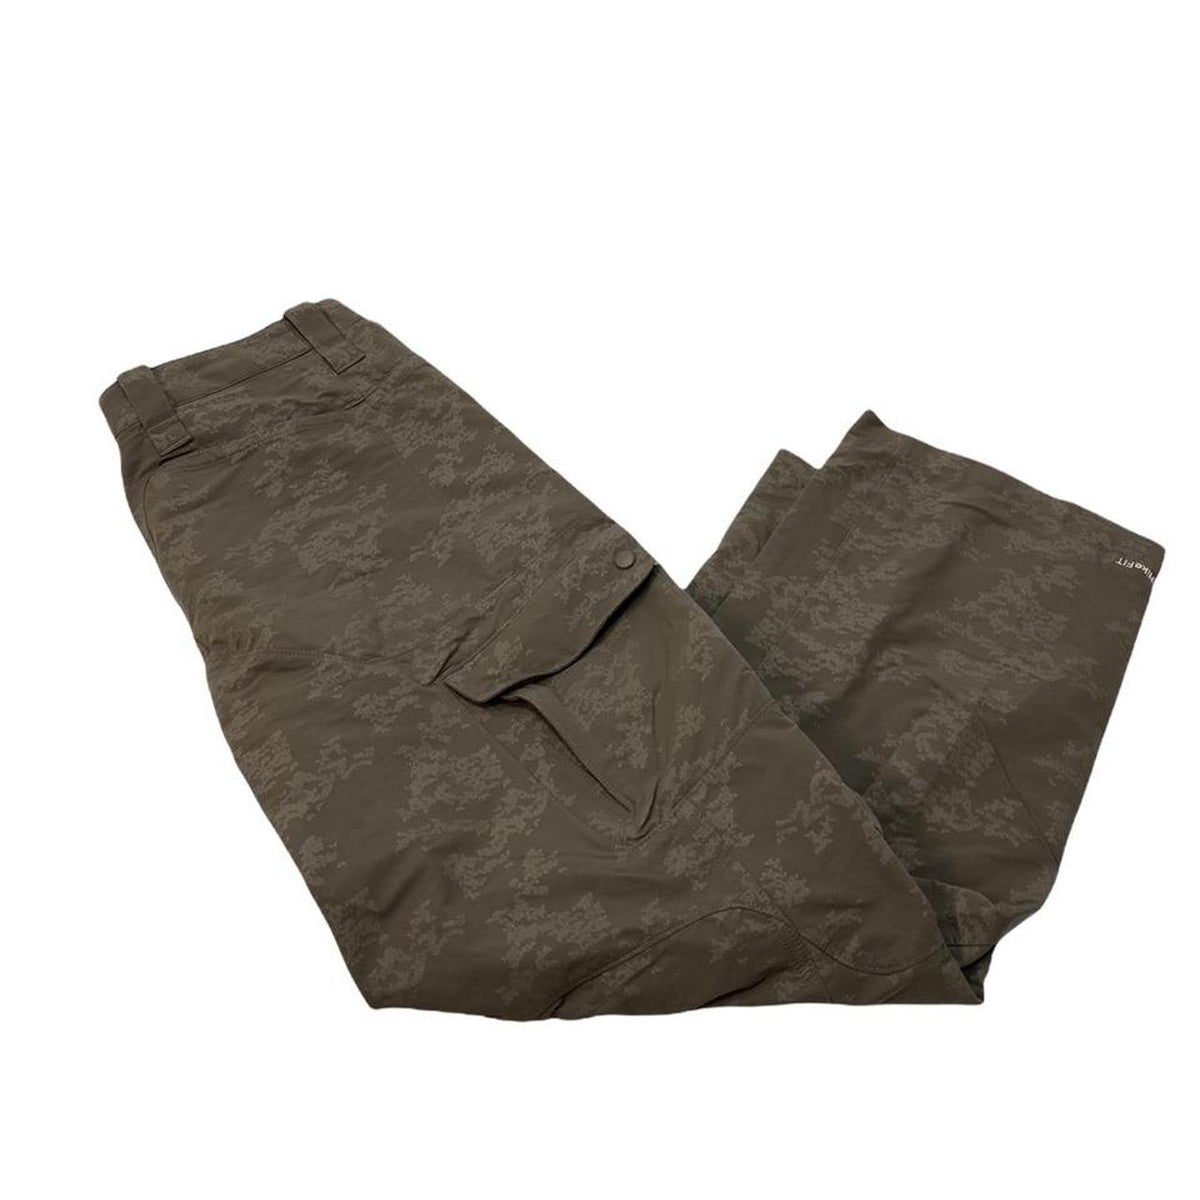 NIKE ACG STORM CARGO TROUSERS IN Brown & Grey GREAT POCKETS - military style industrial technical - Not In Your Wardrobe™ - [Vendor]